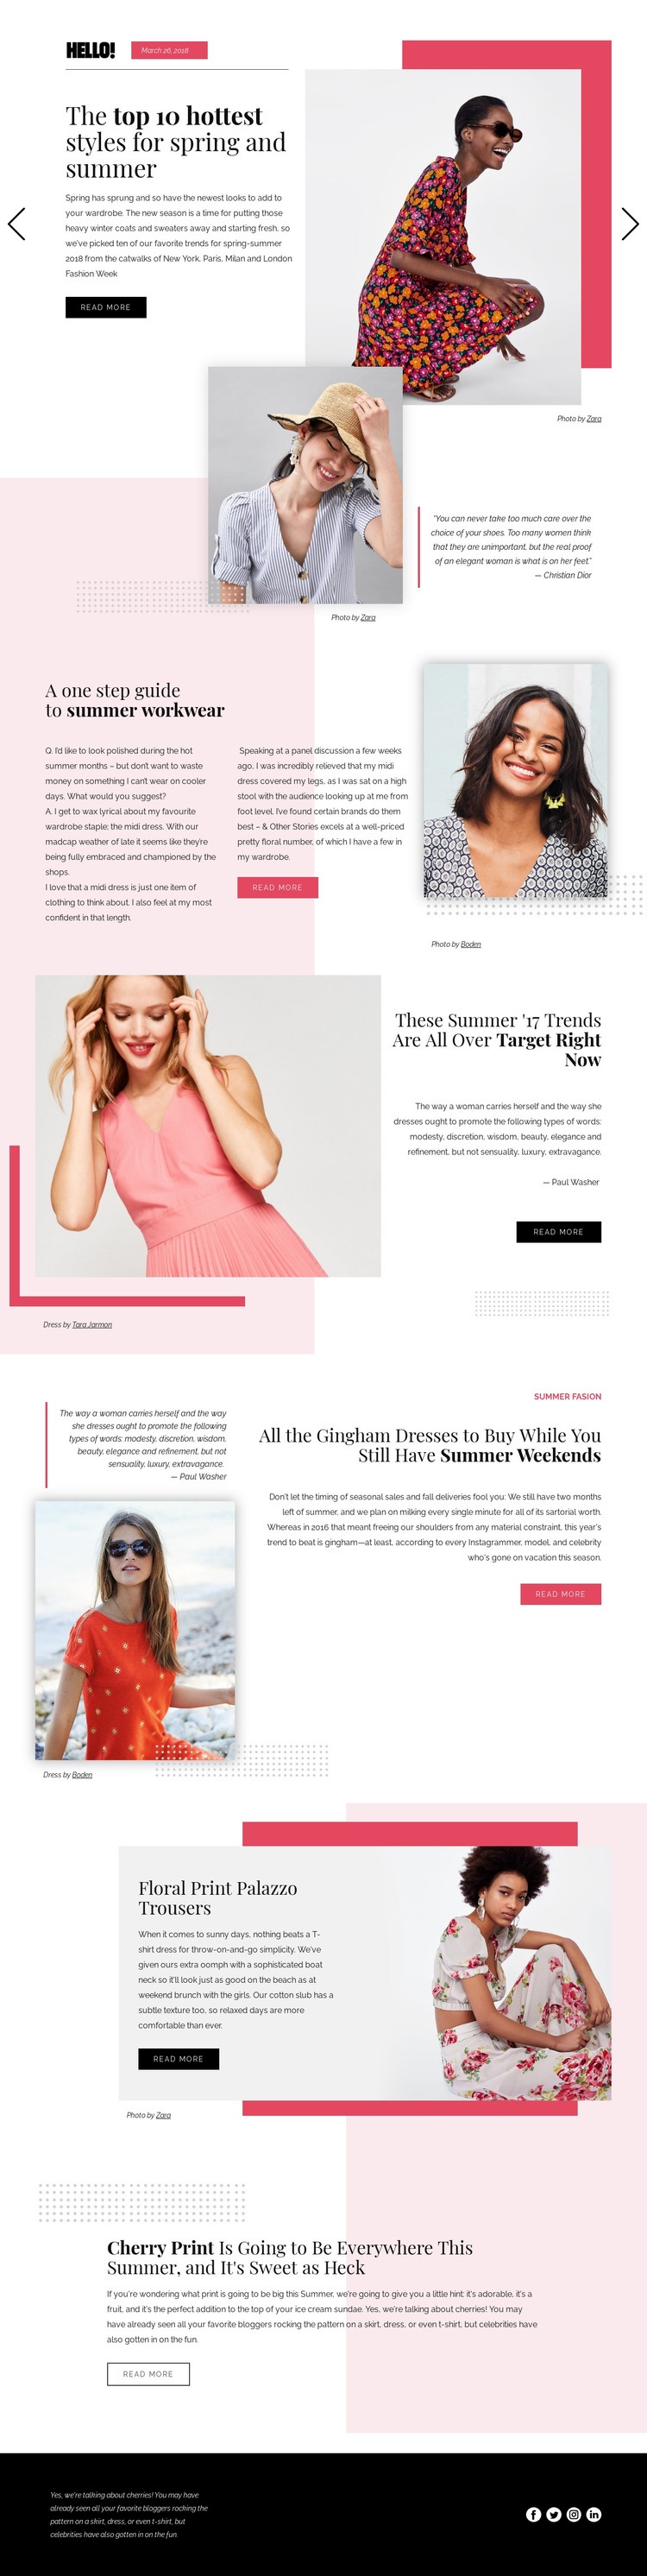 Fashion Trends Html Code Example